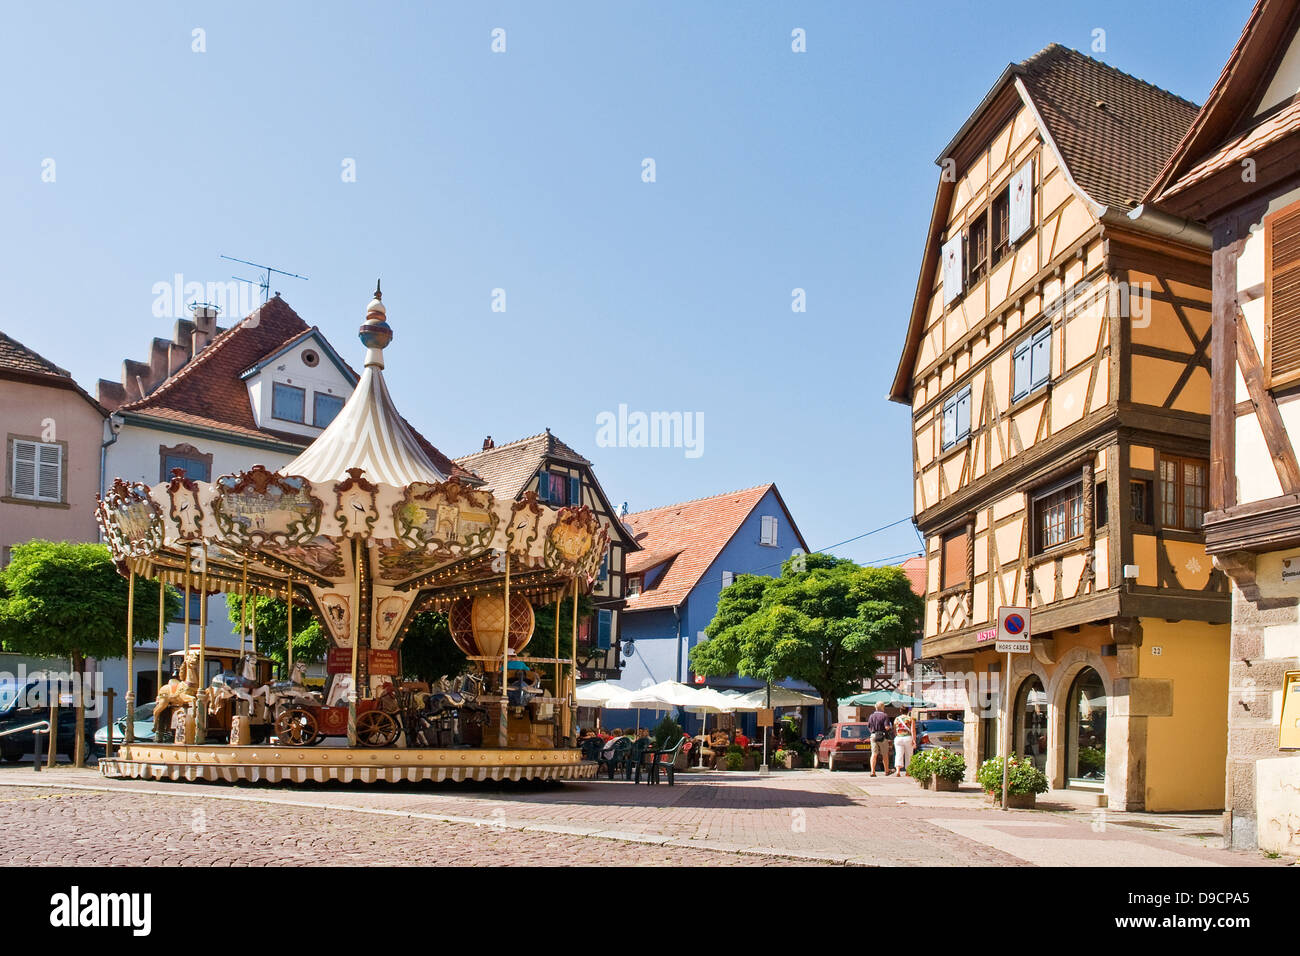 Karusell before half-timbered houses in the Old Town of Obernai Stock Photo